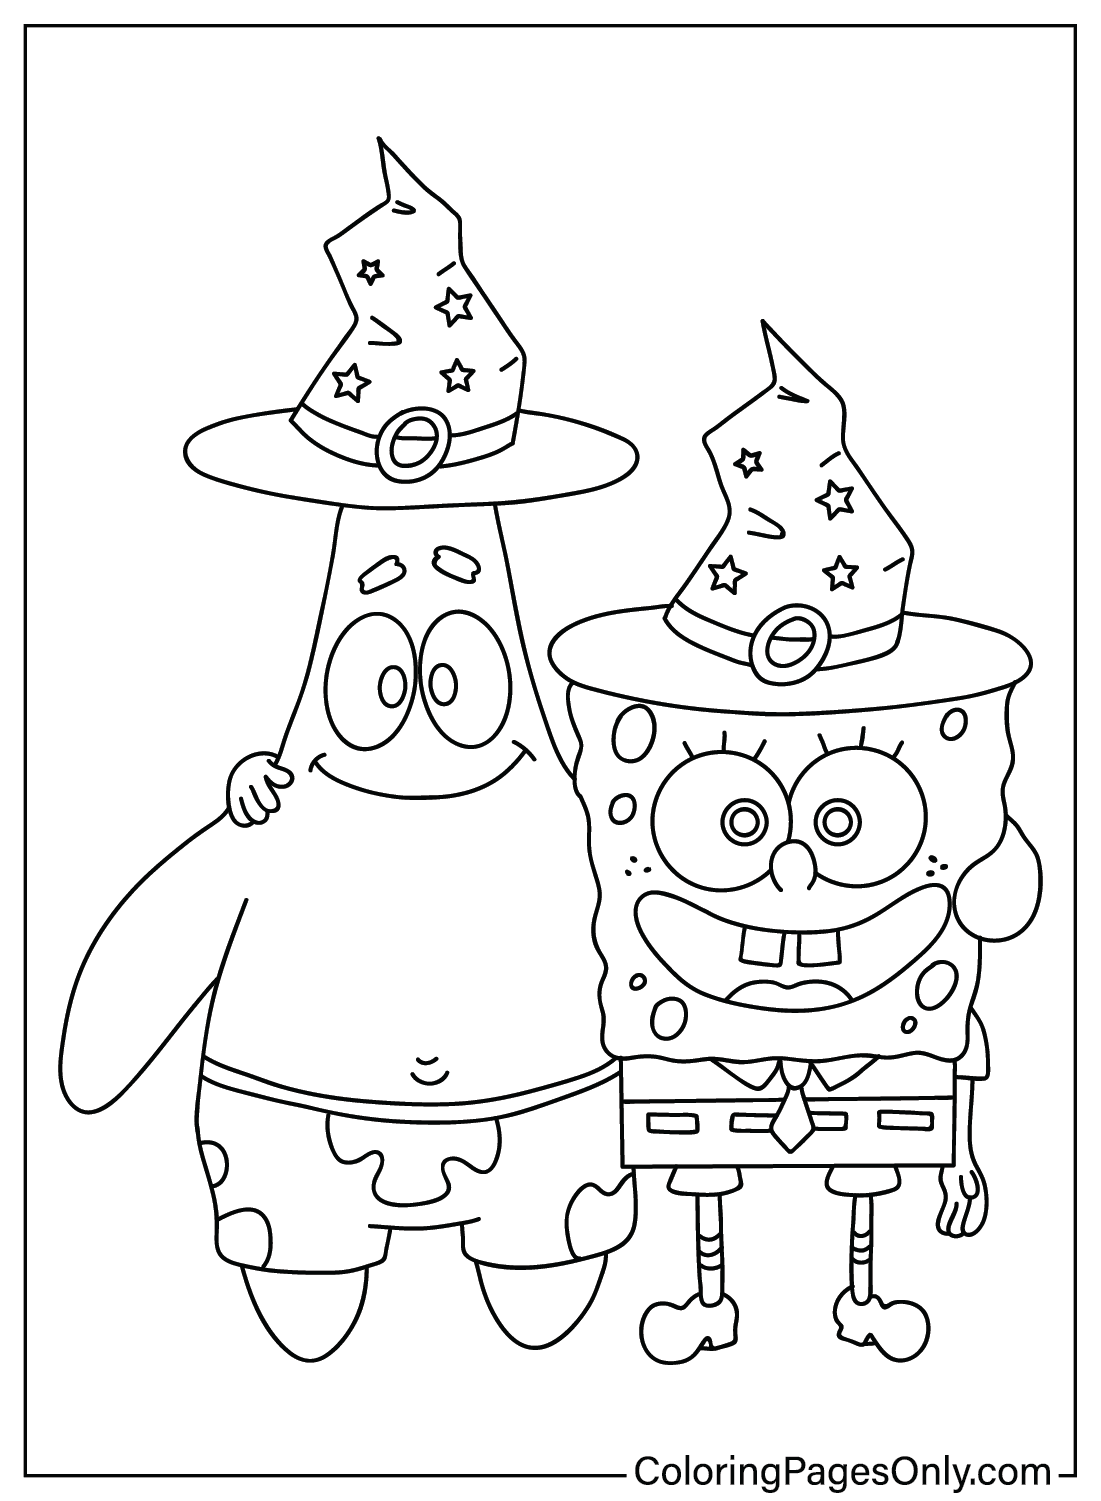 Spongebob and Patrick Halloween Coloring Page